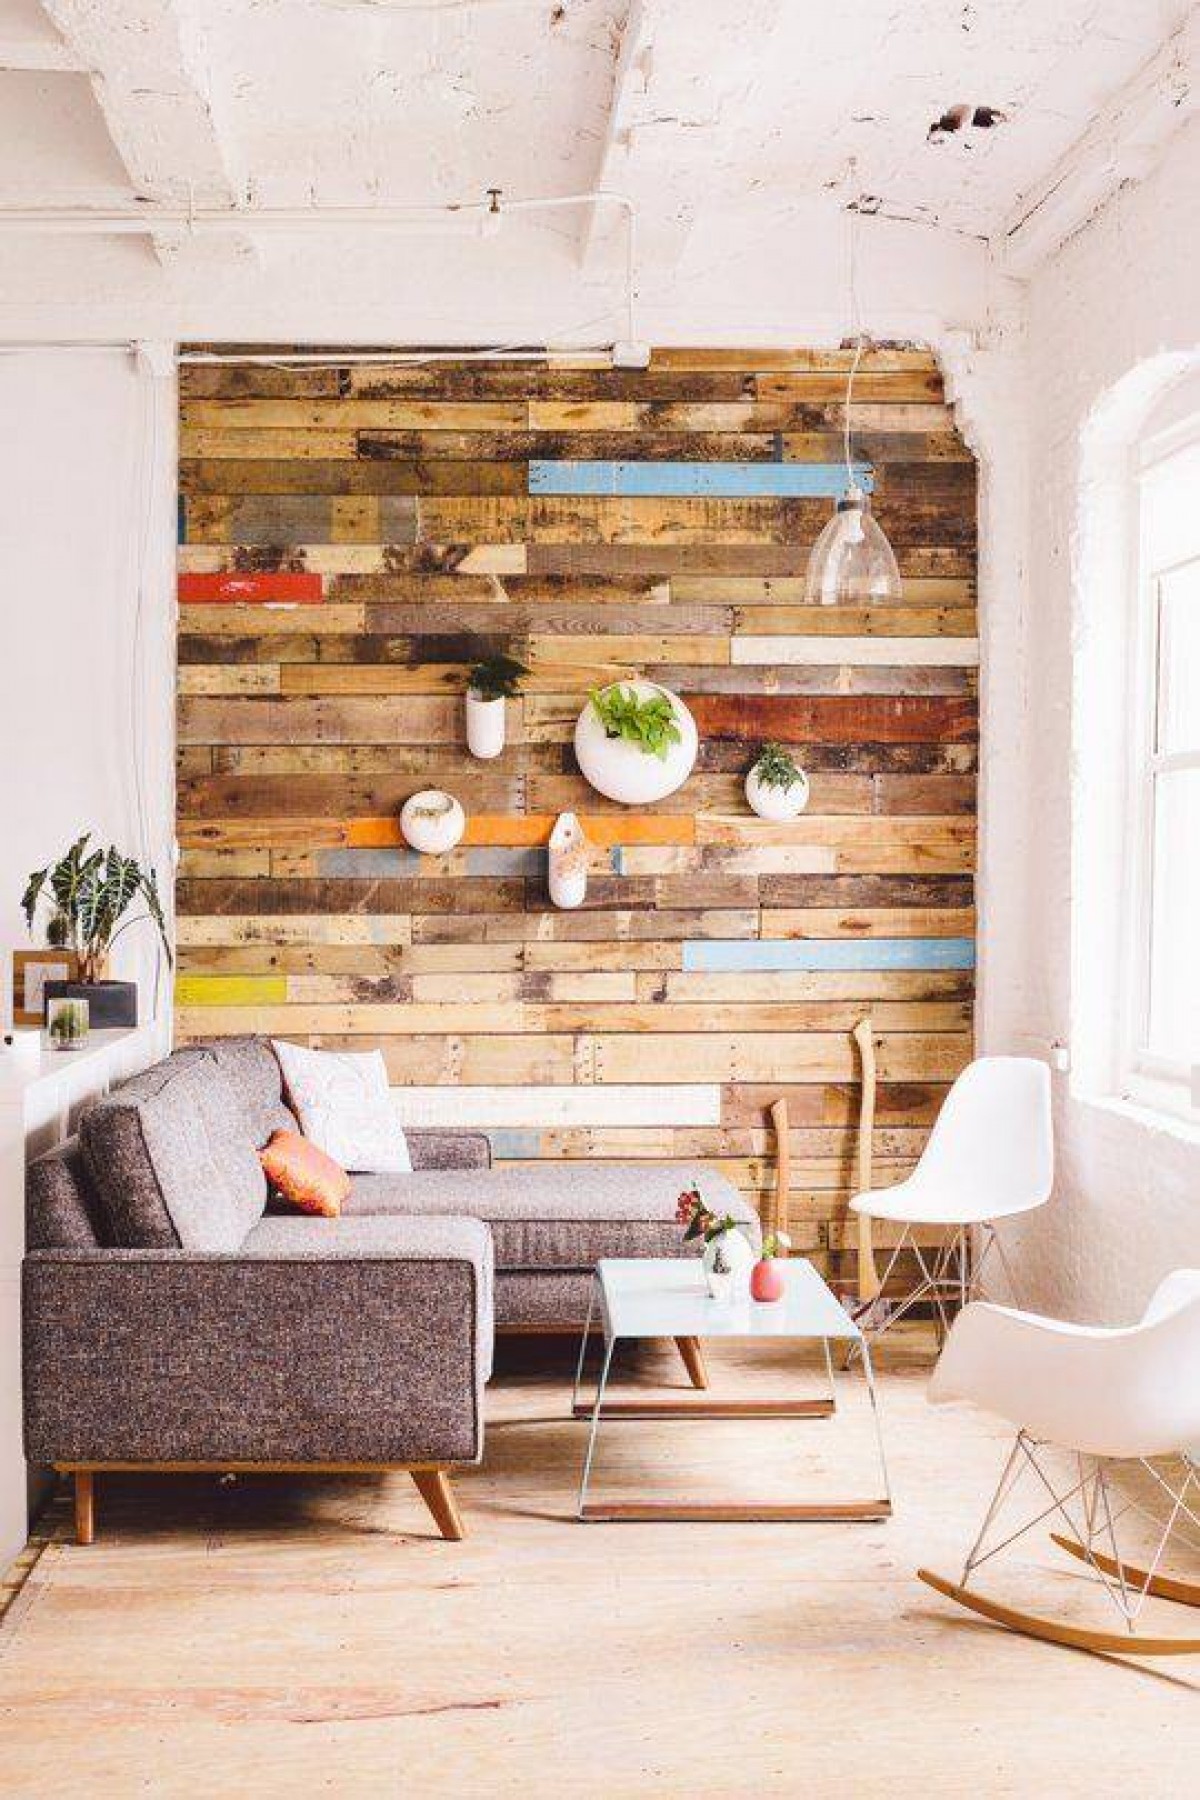 Diy Recycled Pallet Wall Art Ideas That Will Enhance The Interior Of